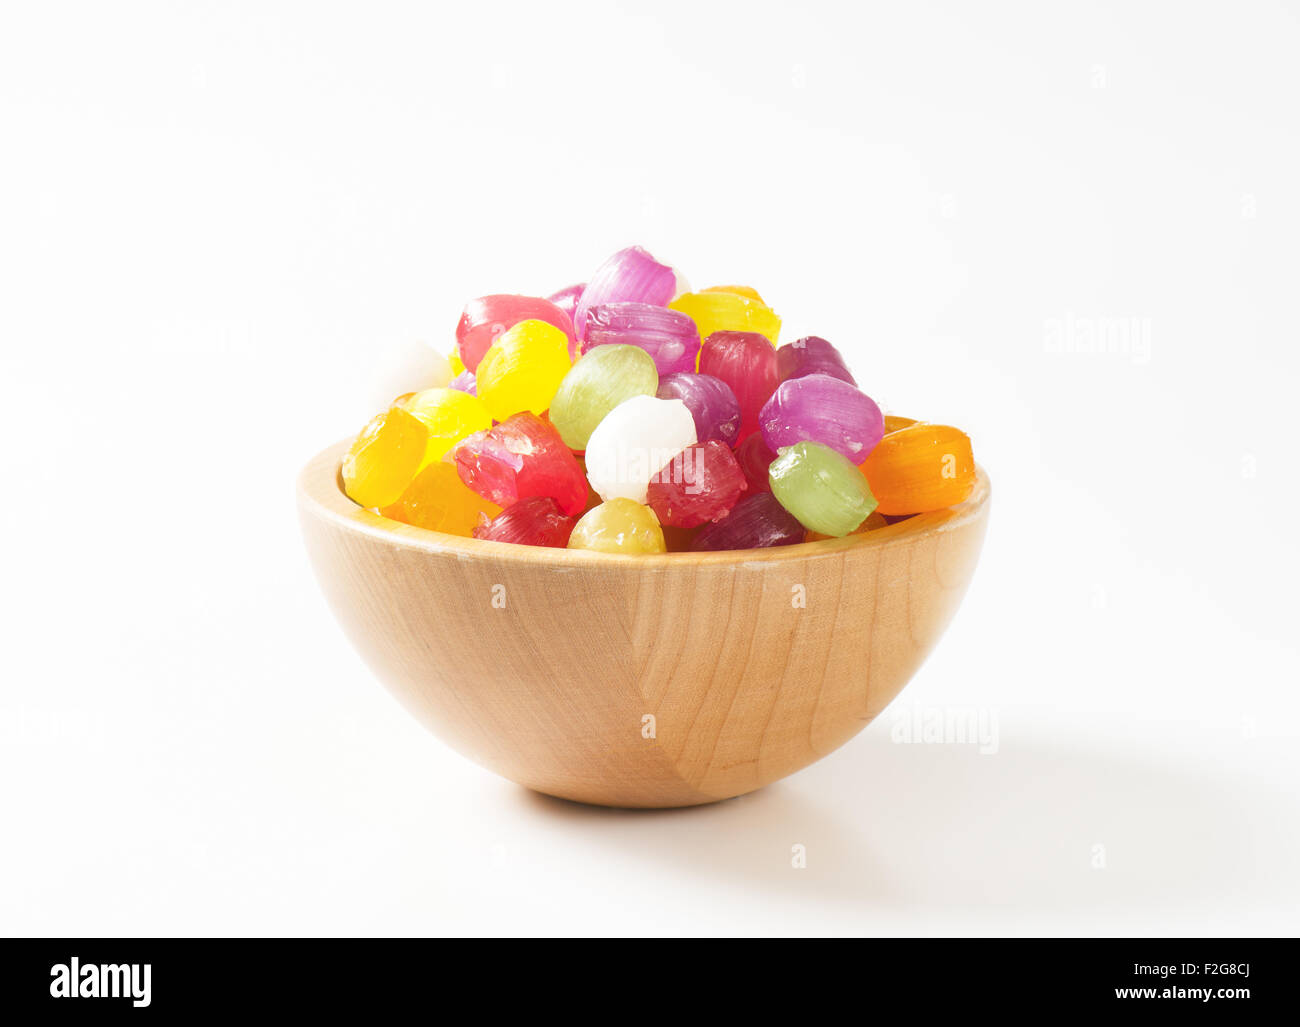 Fruit flavored hard candy drops Stock Photo